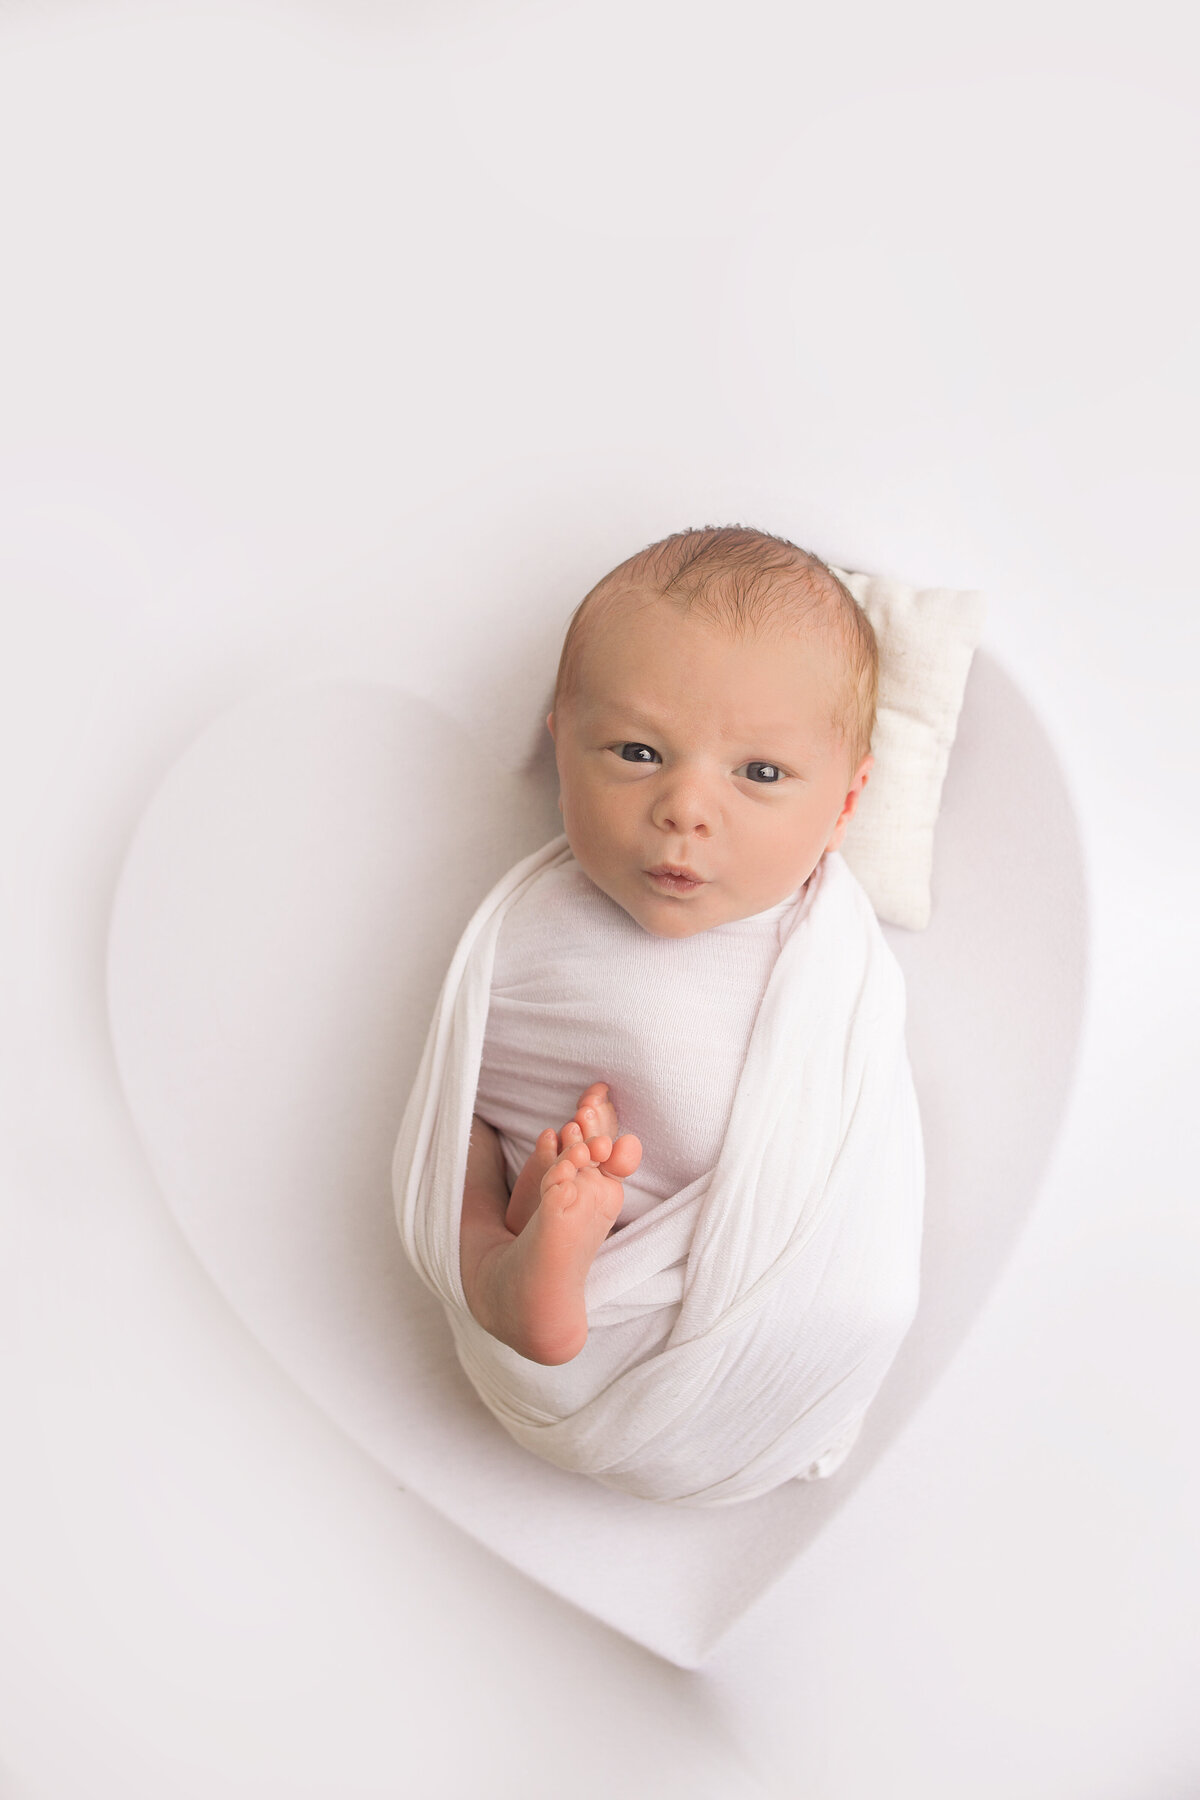 Newborn baby boy wrapped in a white wrap during newborn photoshoot in moutn juliet tennessee photography studio